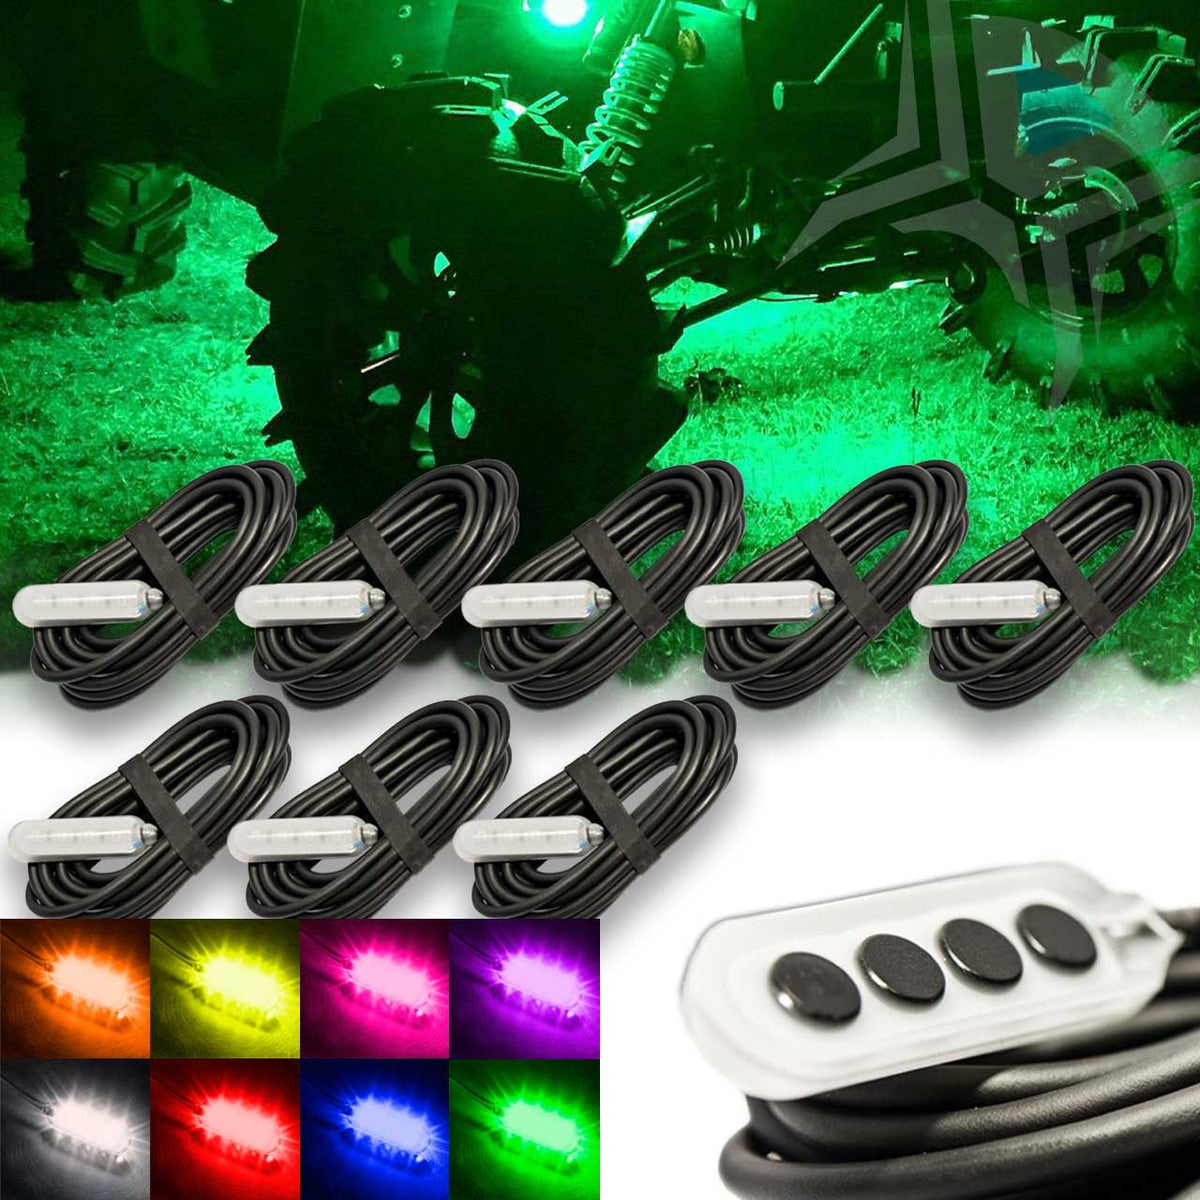 MAX RGB Color Changing LED Rock Light Kit for UTVs 8 Piece Ground Coverage